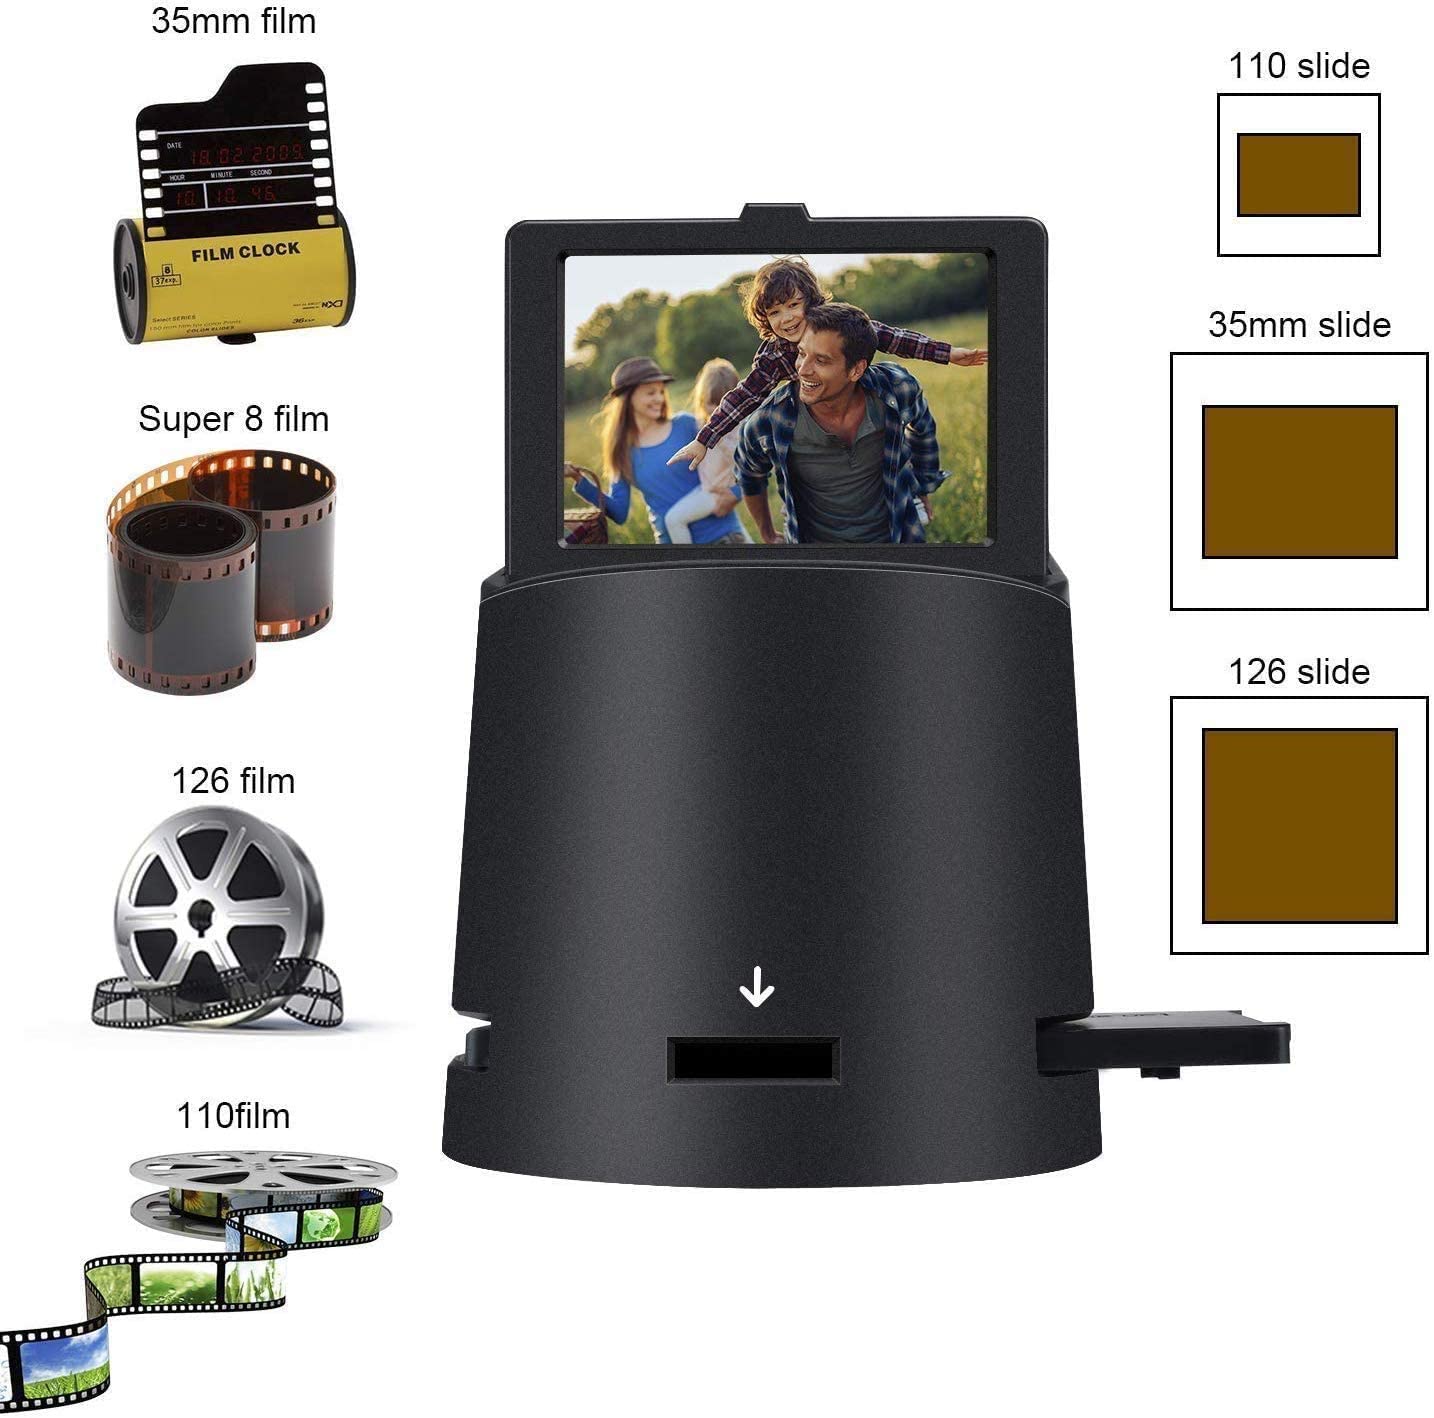 DIGITNOW Film &Slide Scanner with 22MP, Converts 35mm, 126, 110, Super 8 Films, Slides, Negatives to JPEG, Tilt-Up 3.5" LCD, Includes Cables, Film Inserts, MAC and PC Compatible